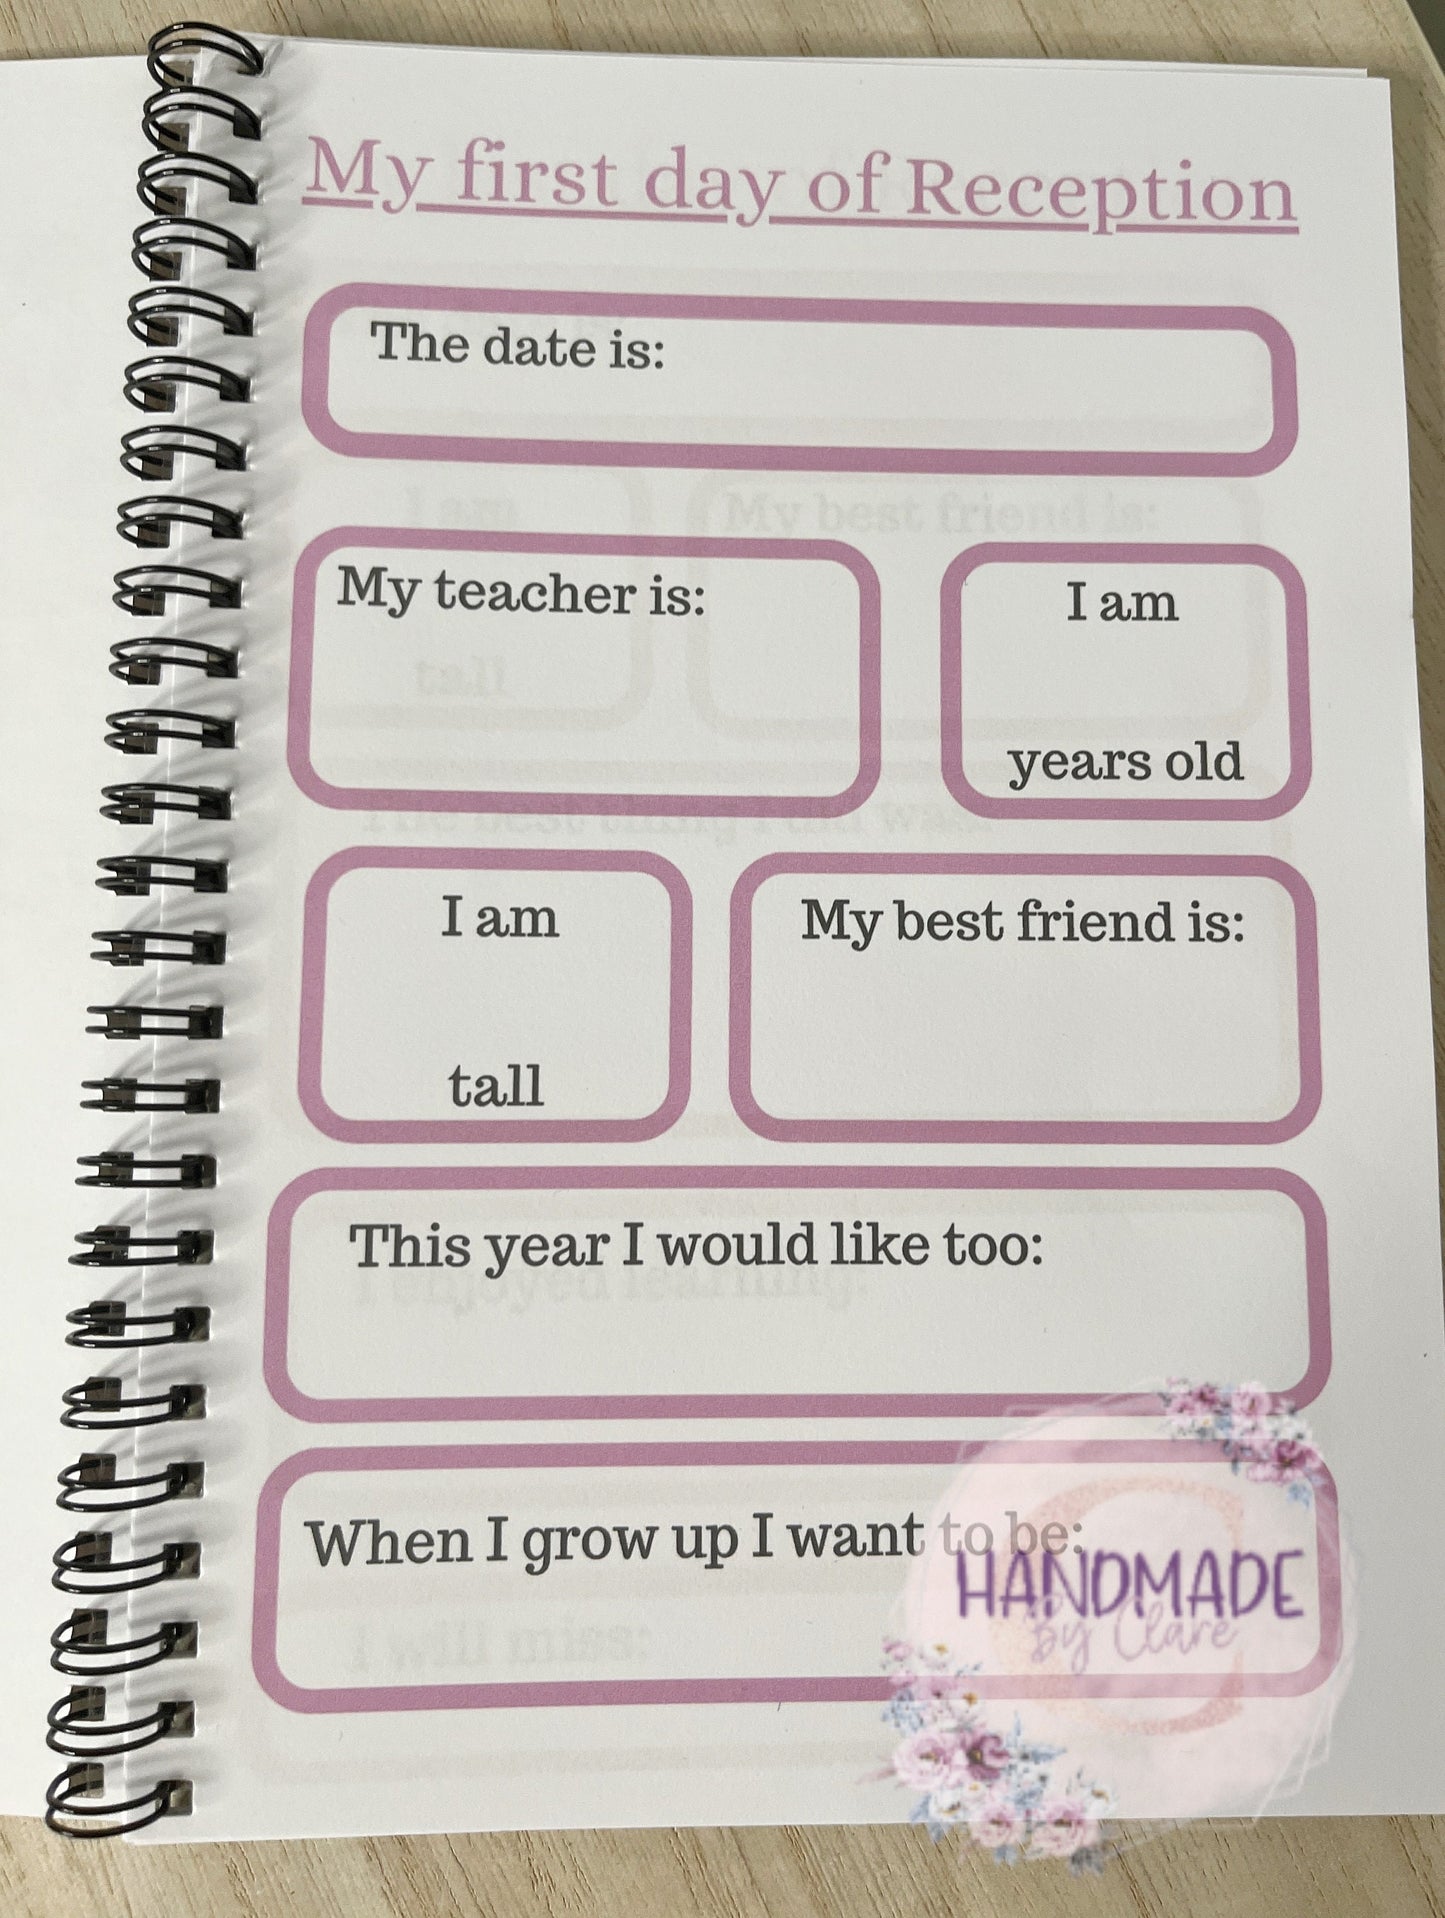 Personalised School Memory Book | My First Day at School | Starting School Gift | School Journal | Reception | Year 6